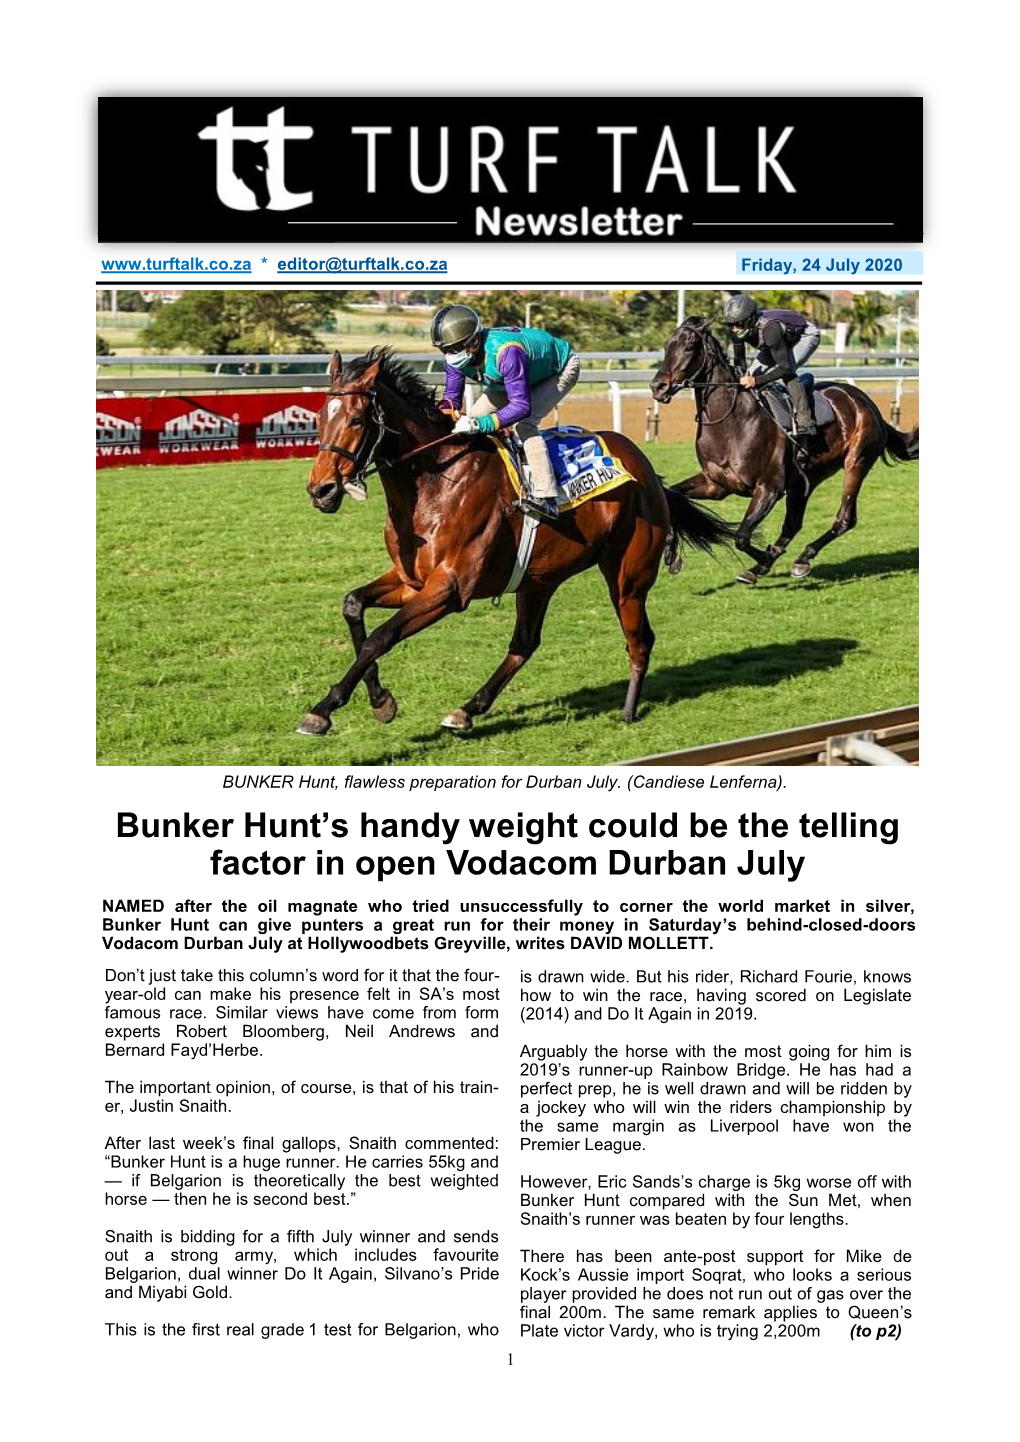 Bunker Hunt's Handy Weight Could Be the Telling Factor in Open Vodacom